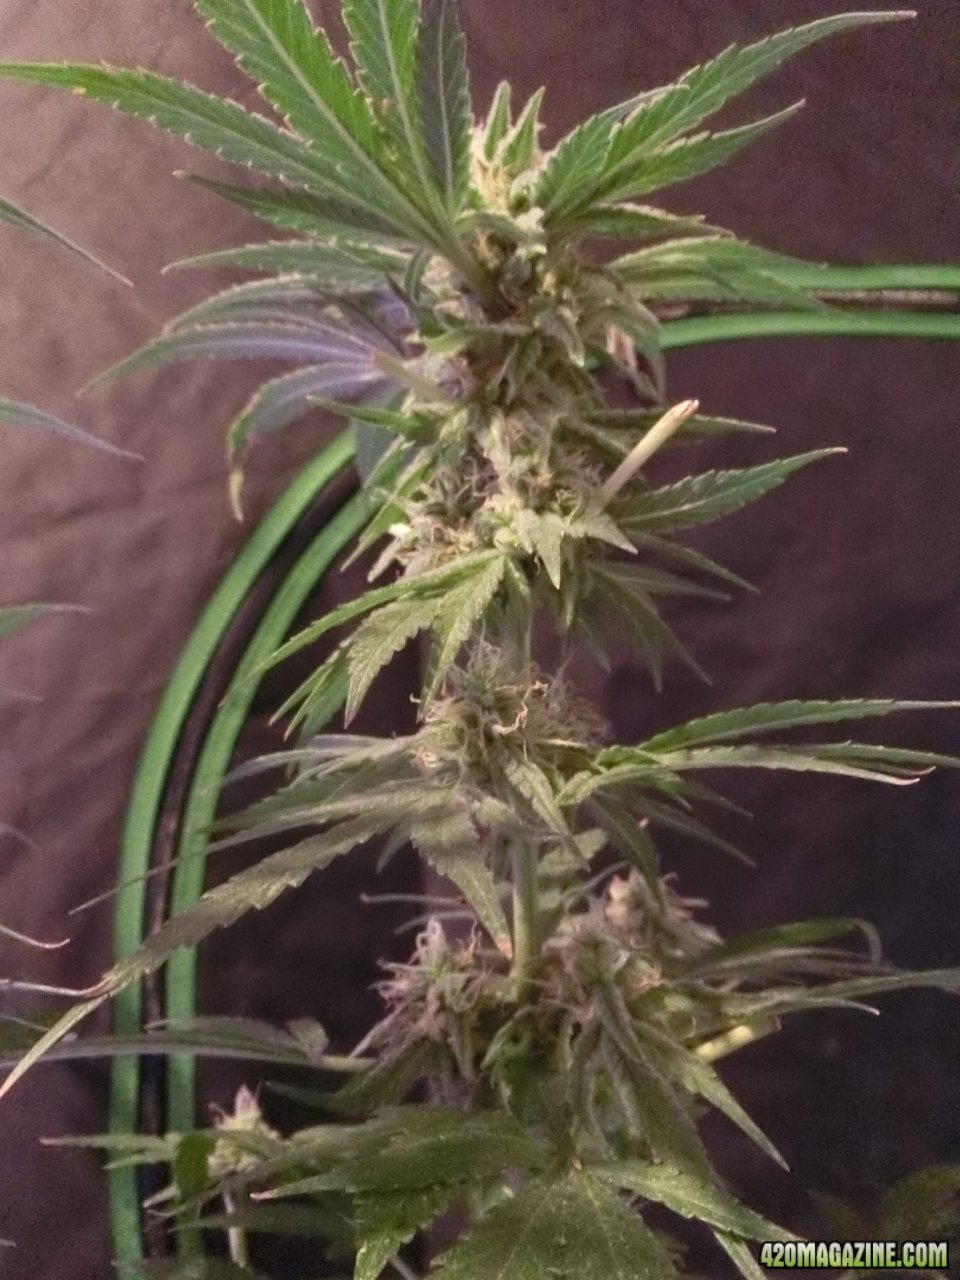 Day 98 Double Black Flo Day 52 - Stem View